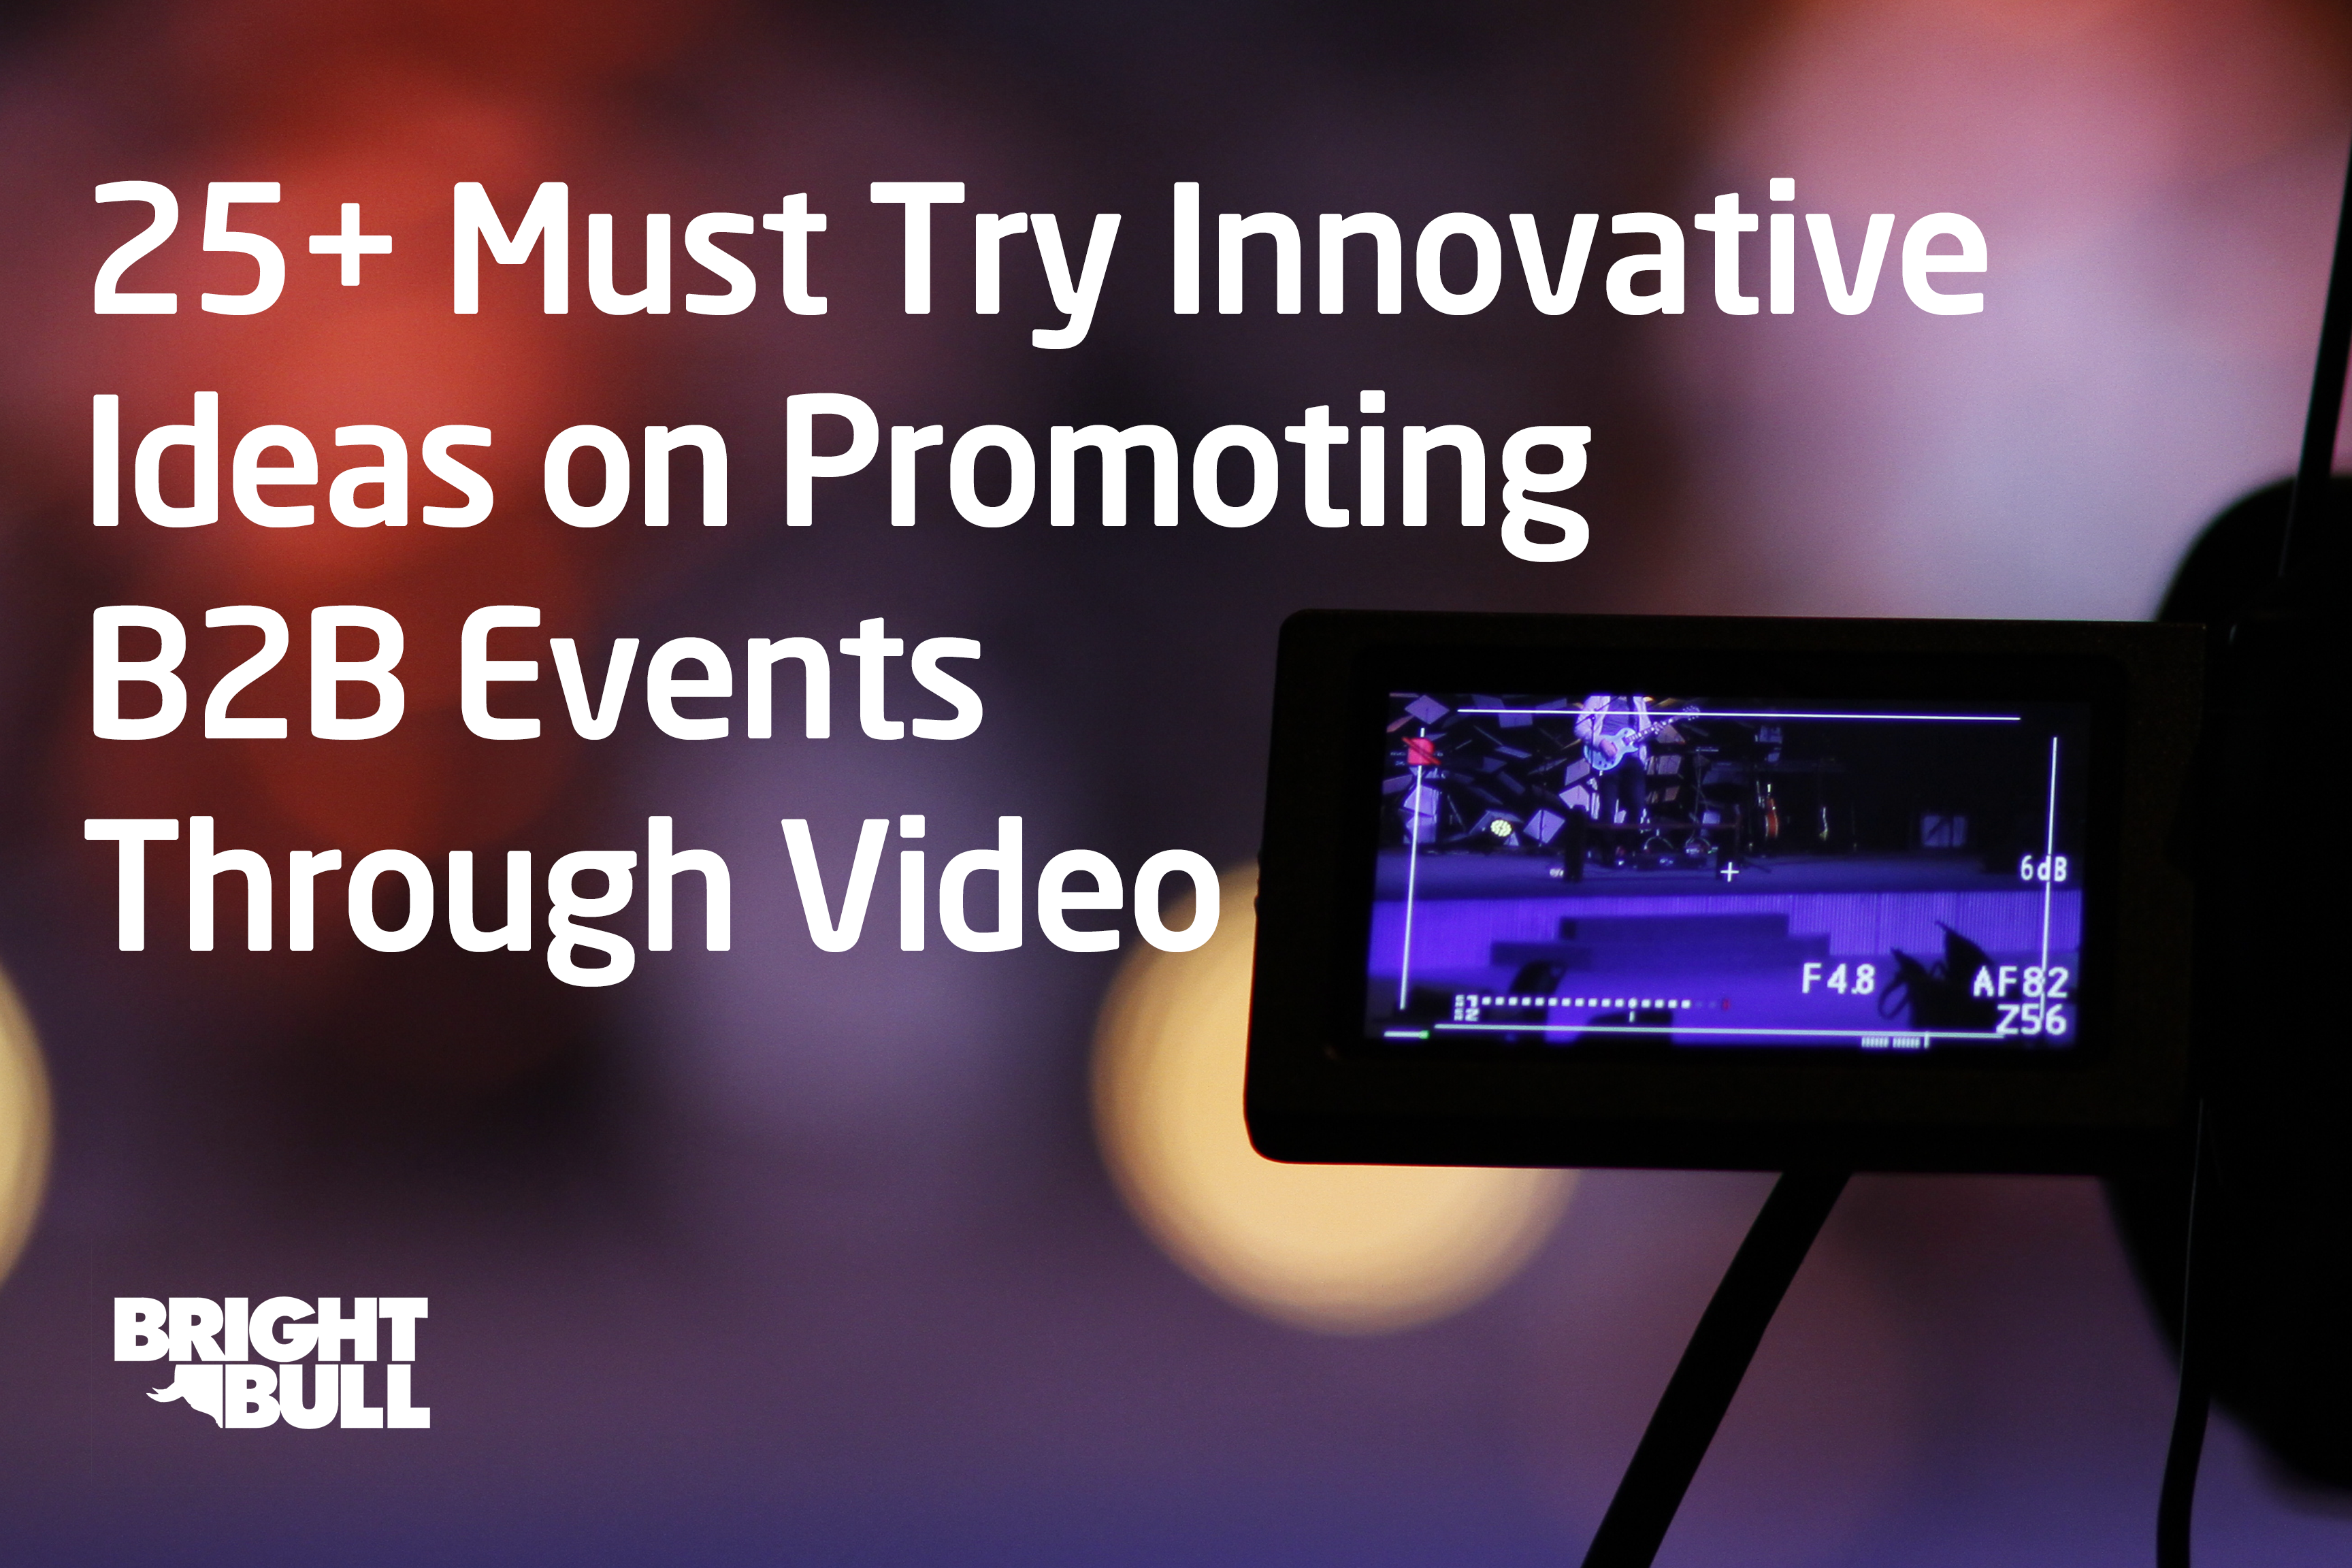 25+ Must Try Innovative Ideas on Promoting B2B Events Through Video